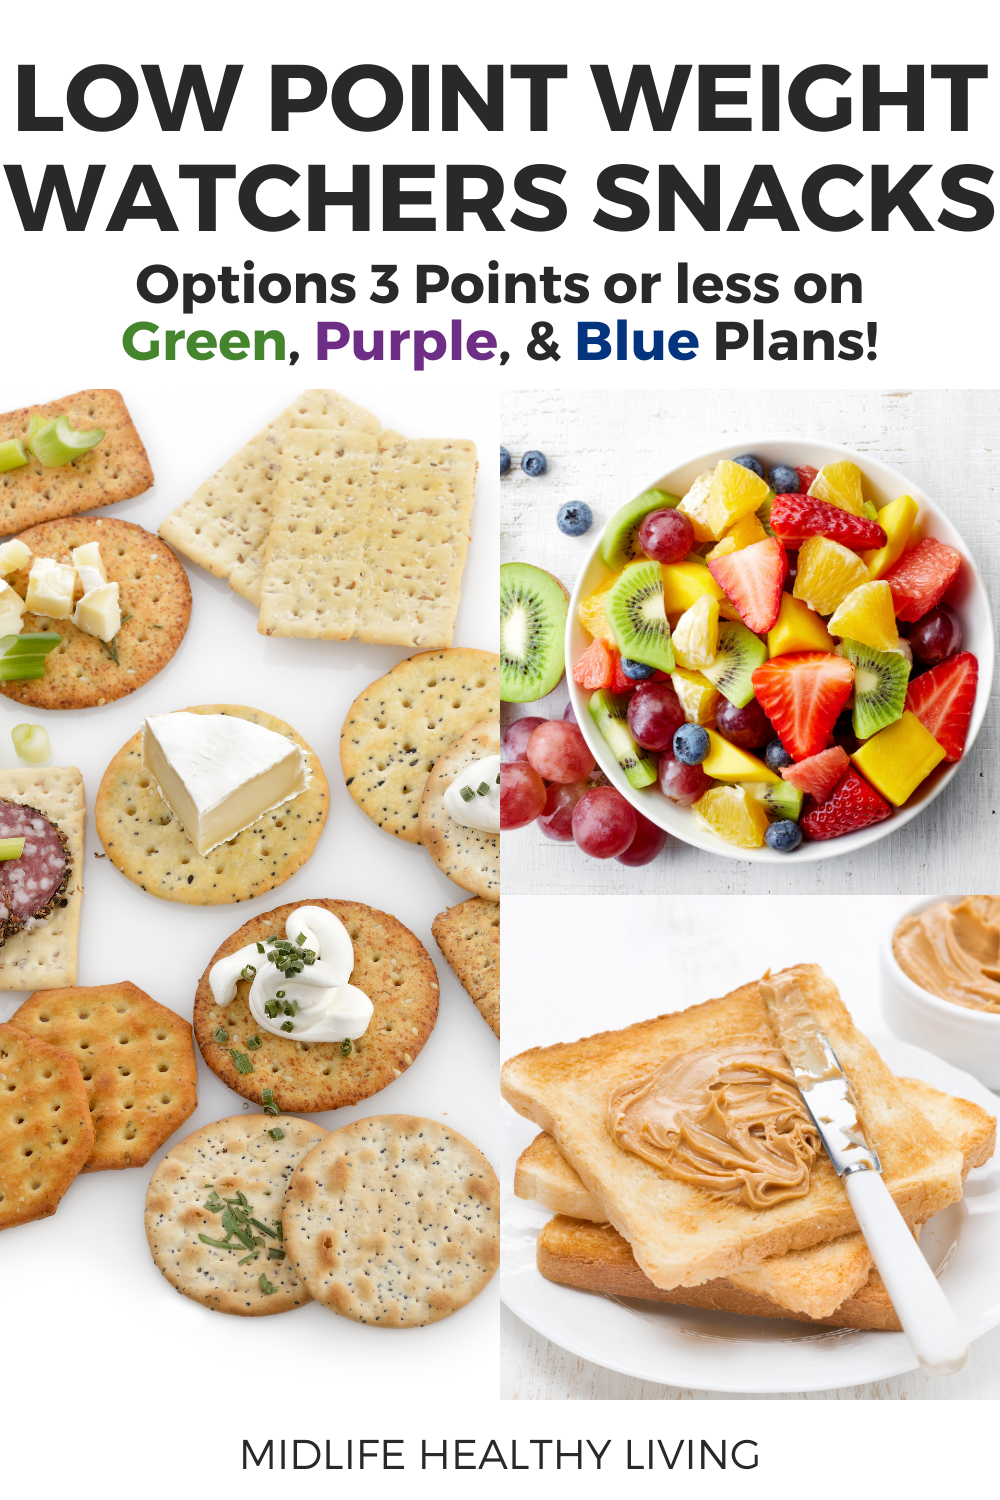 https://www.midlifehealthyliving.com/wp-content/uploads/2014/04/Low-Point-Weight-Watchers-Snacks-Pins.png